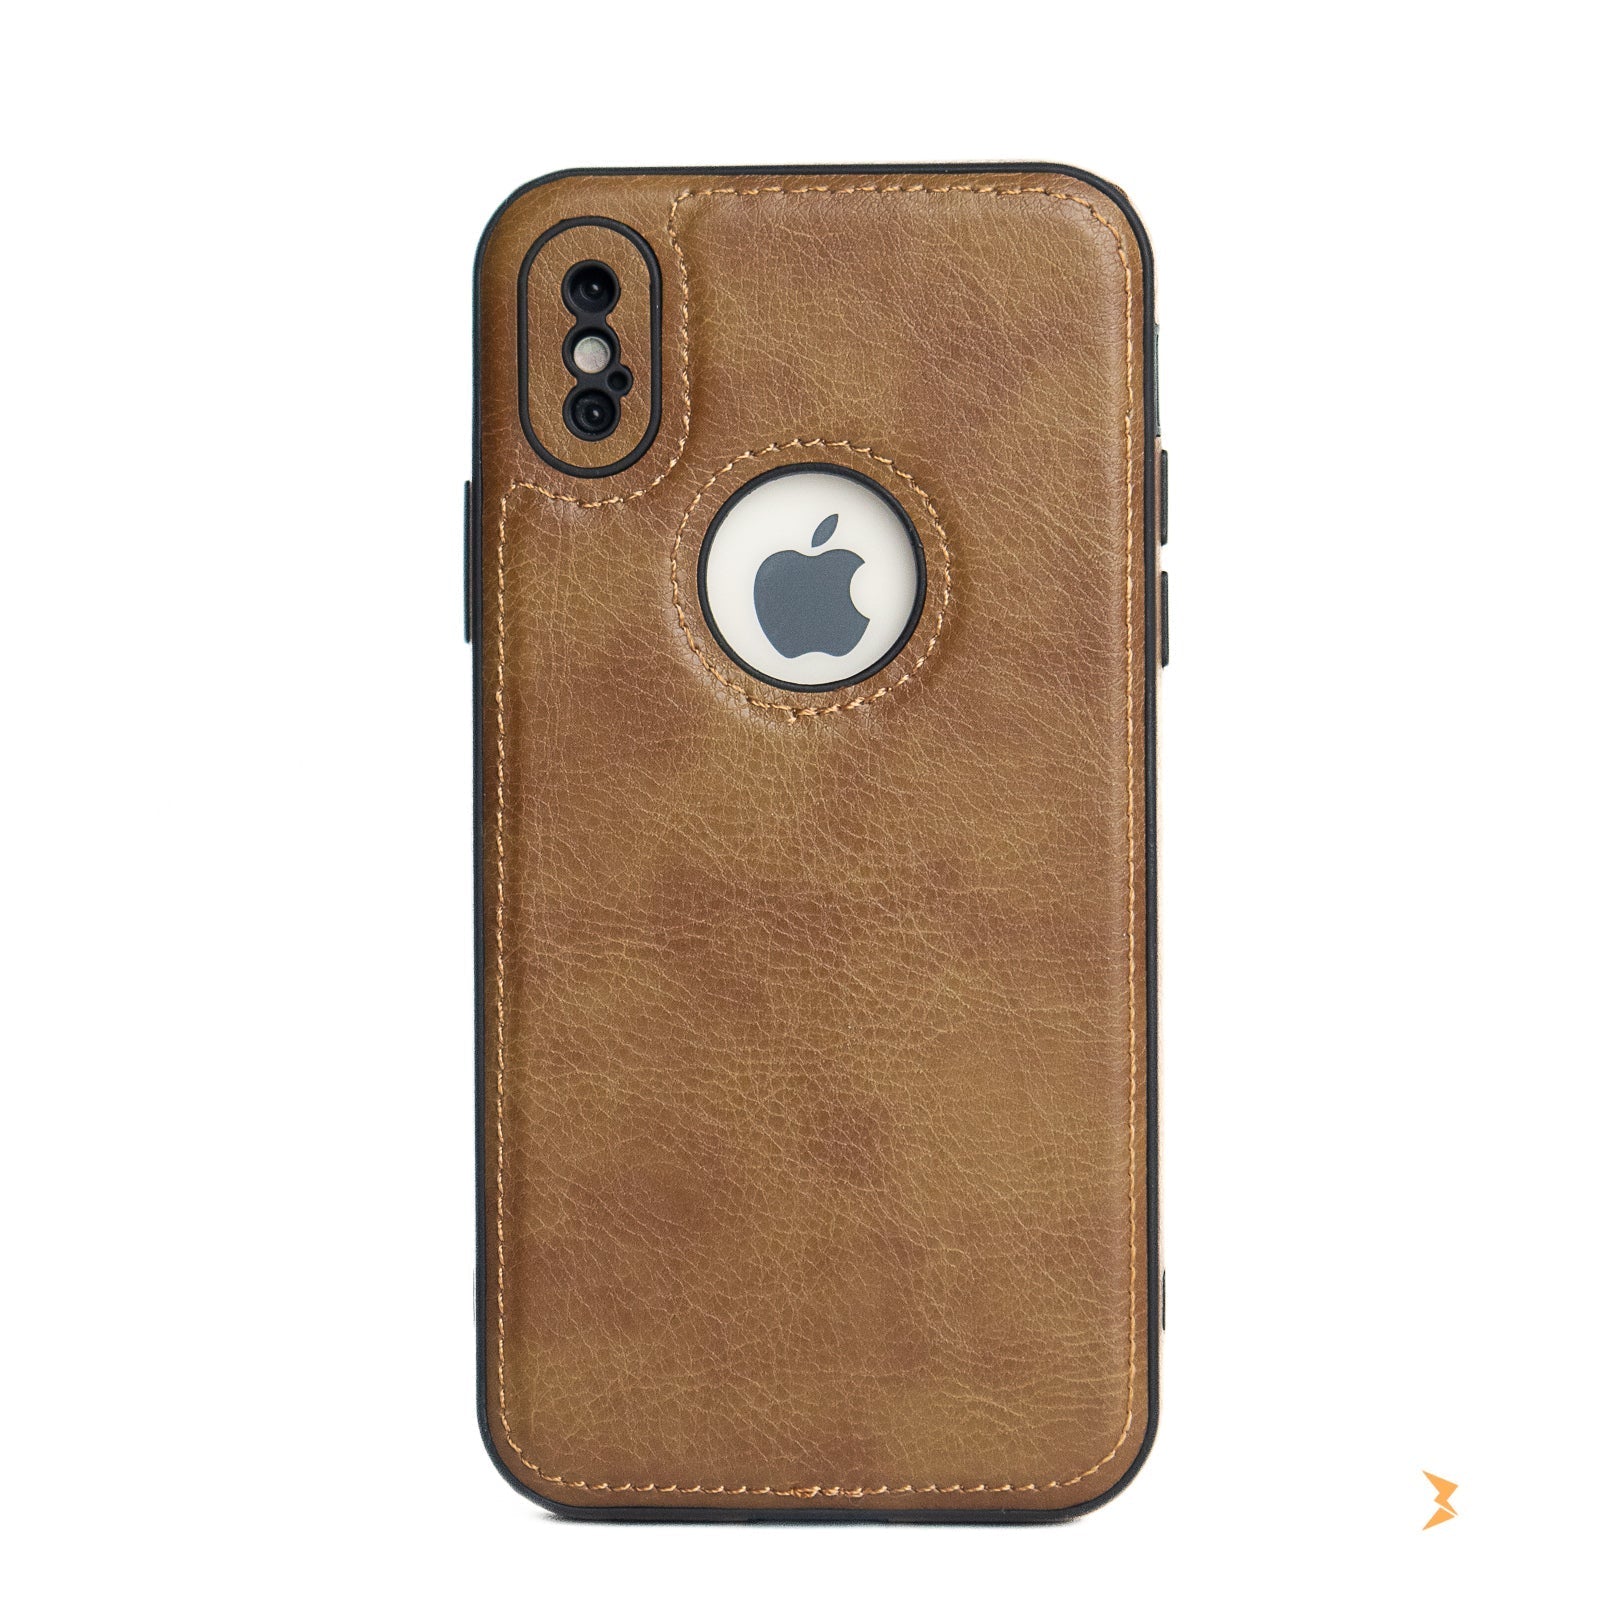 Prato Leather Case iPhone XR Three store